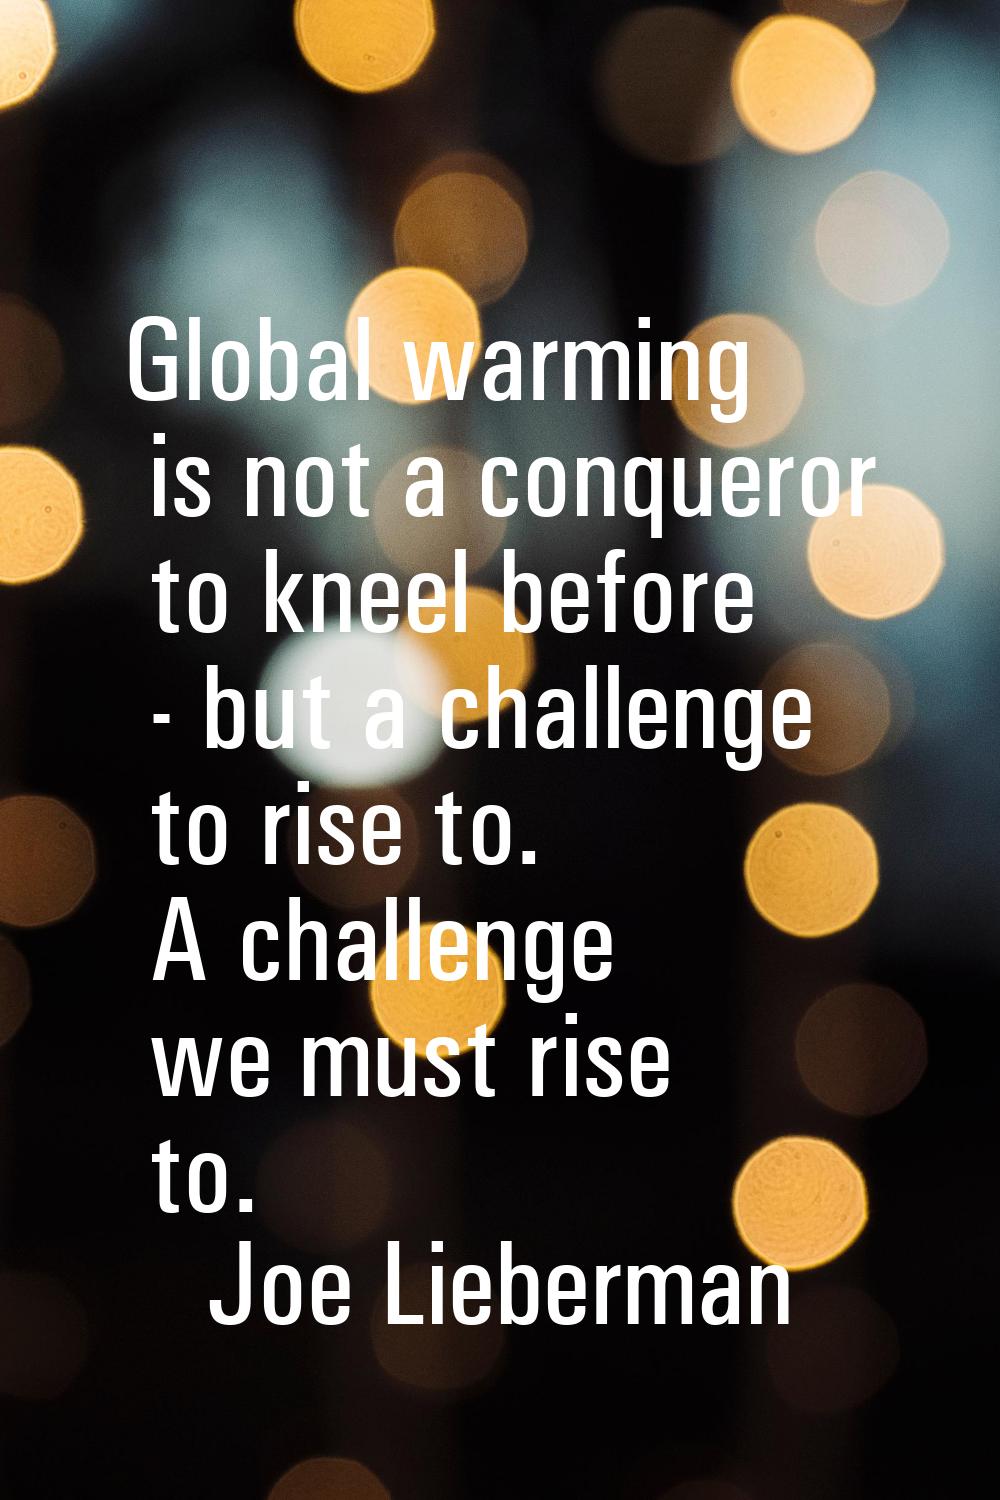 Global warming is not a conqueror to kneel before - but a challenge to rise to. A challenge we must